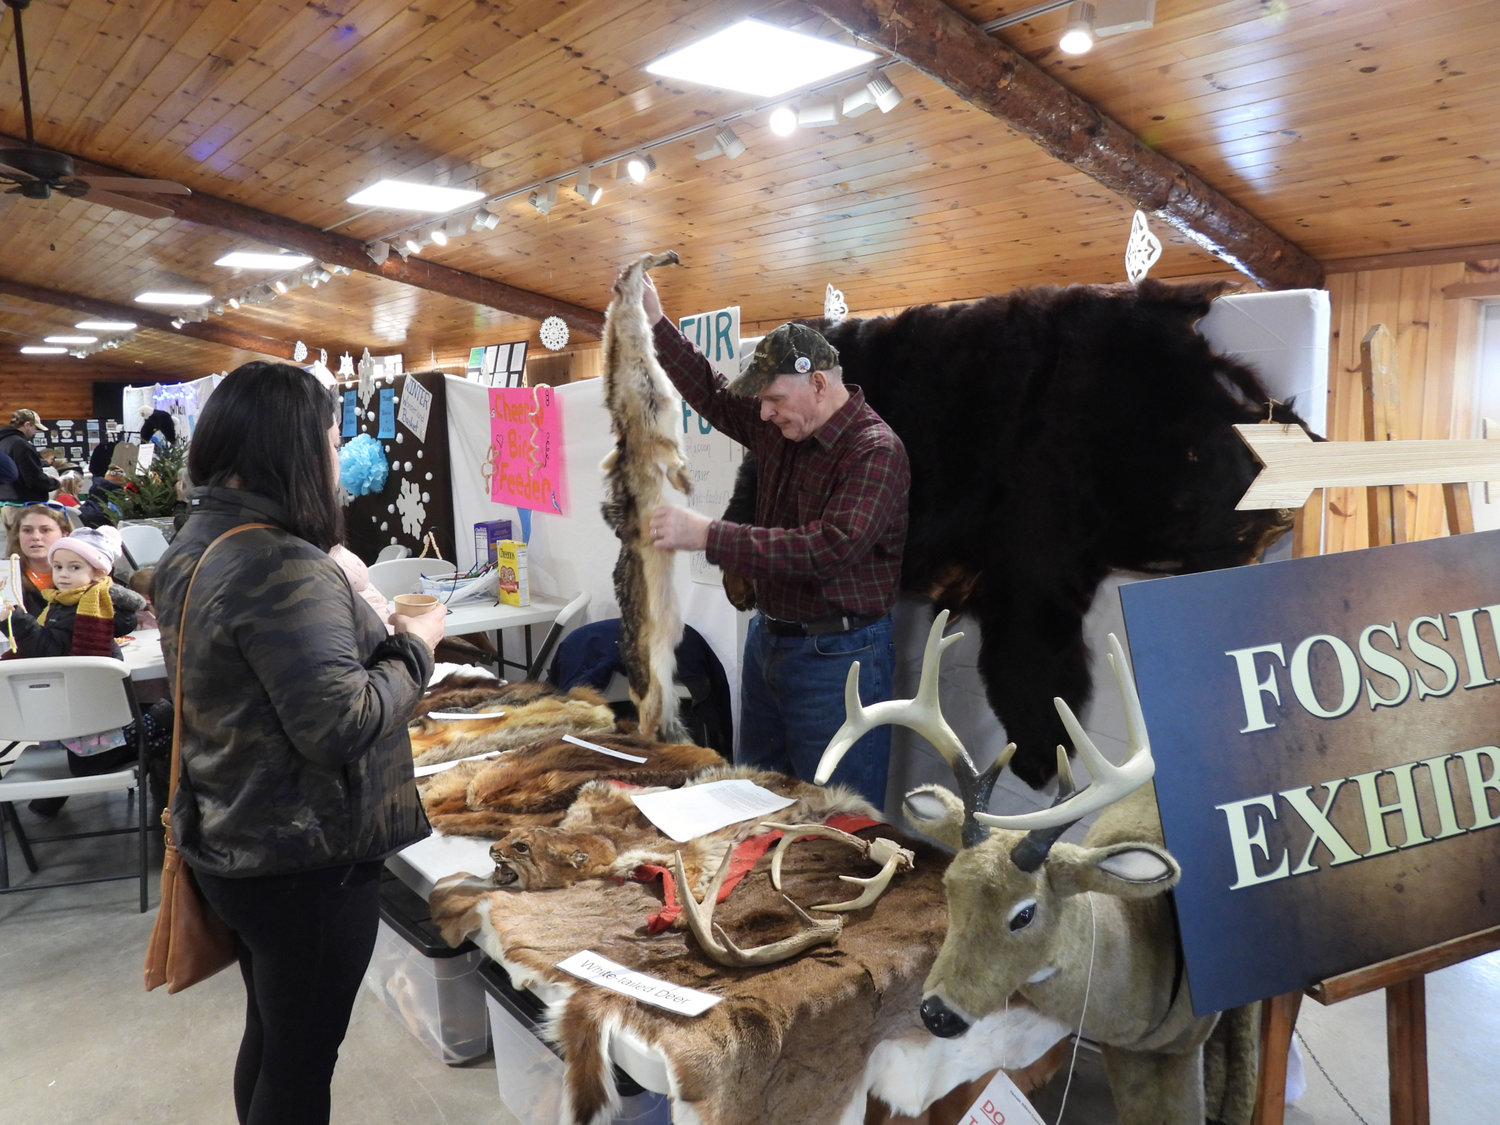 The Winter Hibernation Festival at the Great Swamp Conservancy saw people from all over